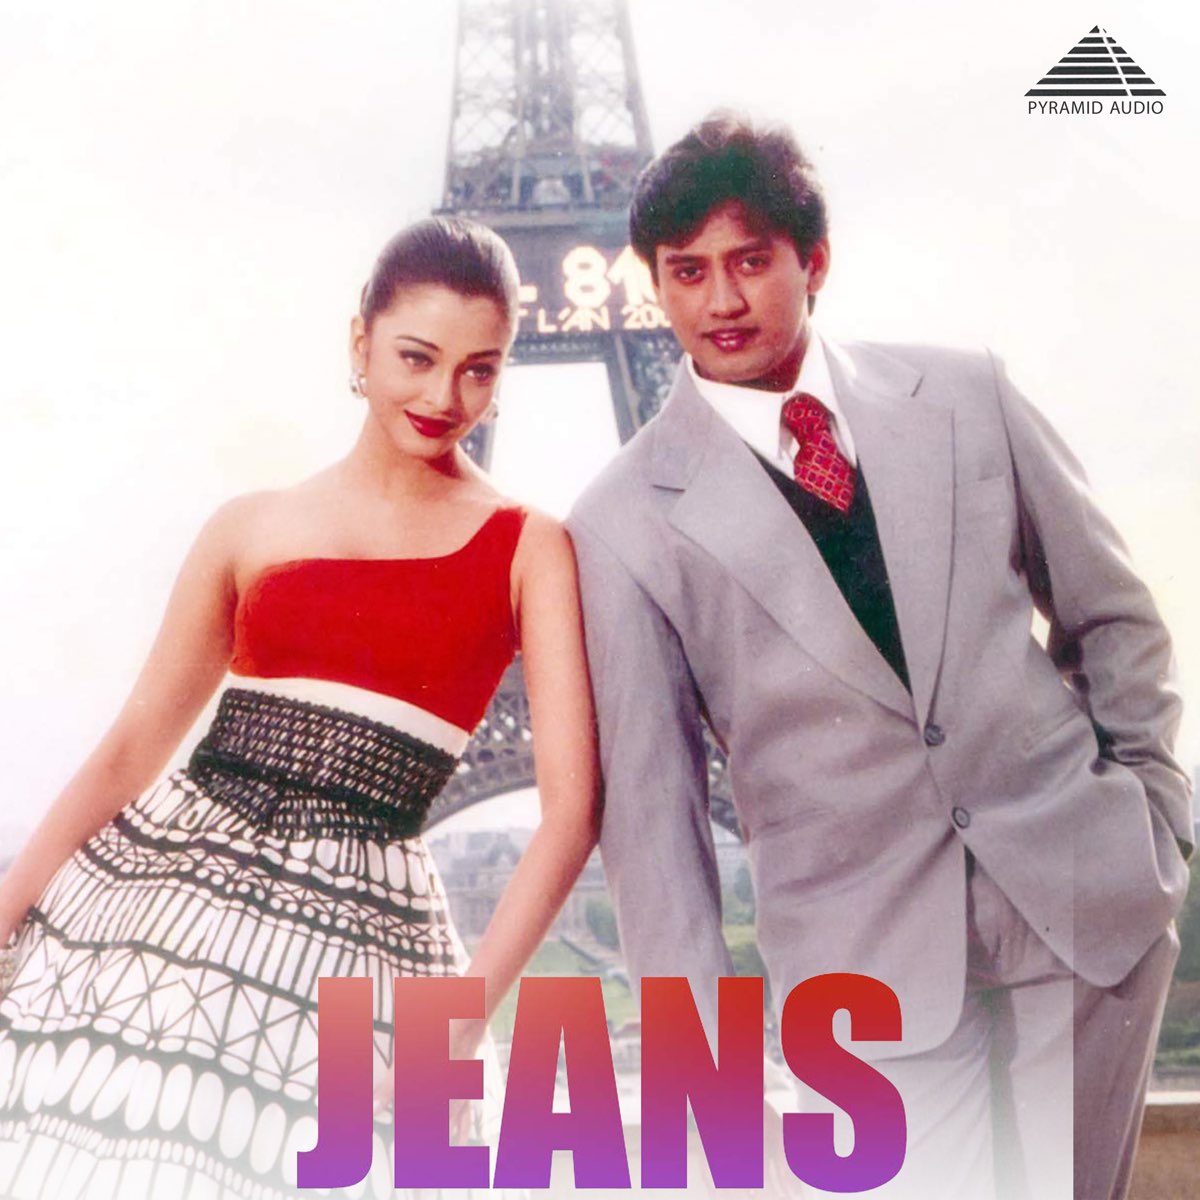 Jeans - The movie which introduced mega budgets and larger than life  settings in Tamil Cinema. : r/kollywood